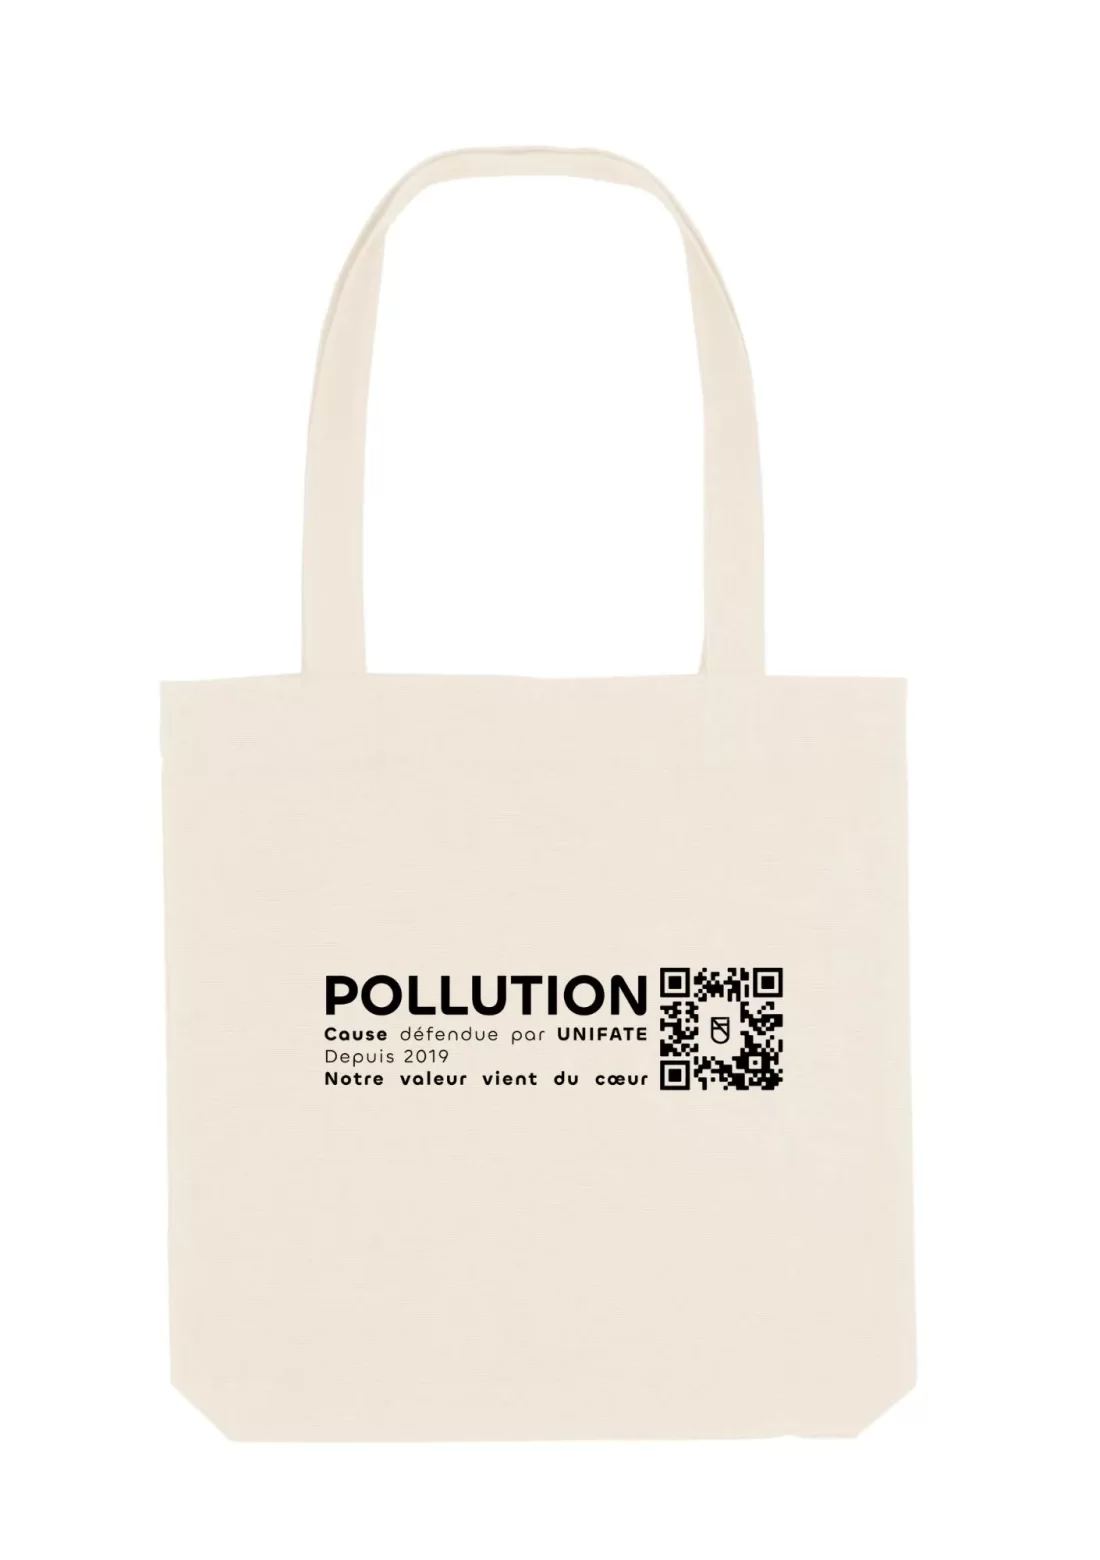 unifate-marque-responsable-rennes-collection-pollution-ete-tote-bag-blanc-verso